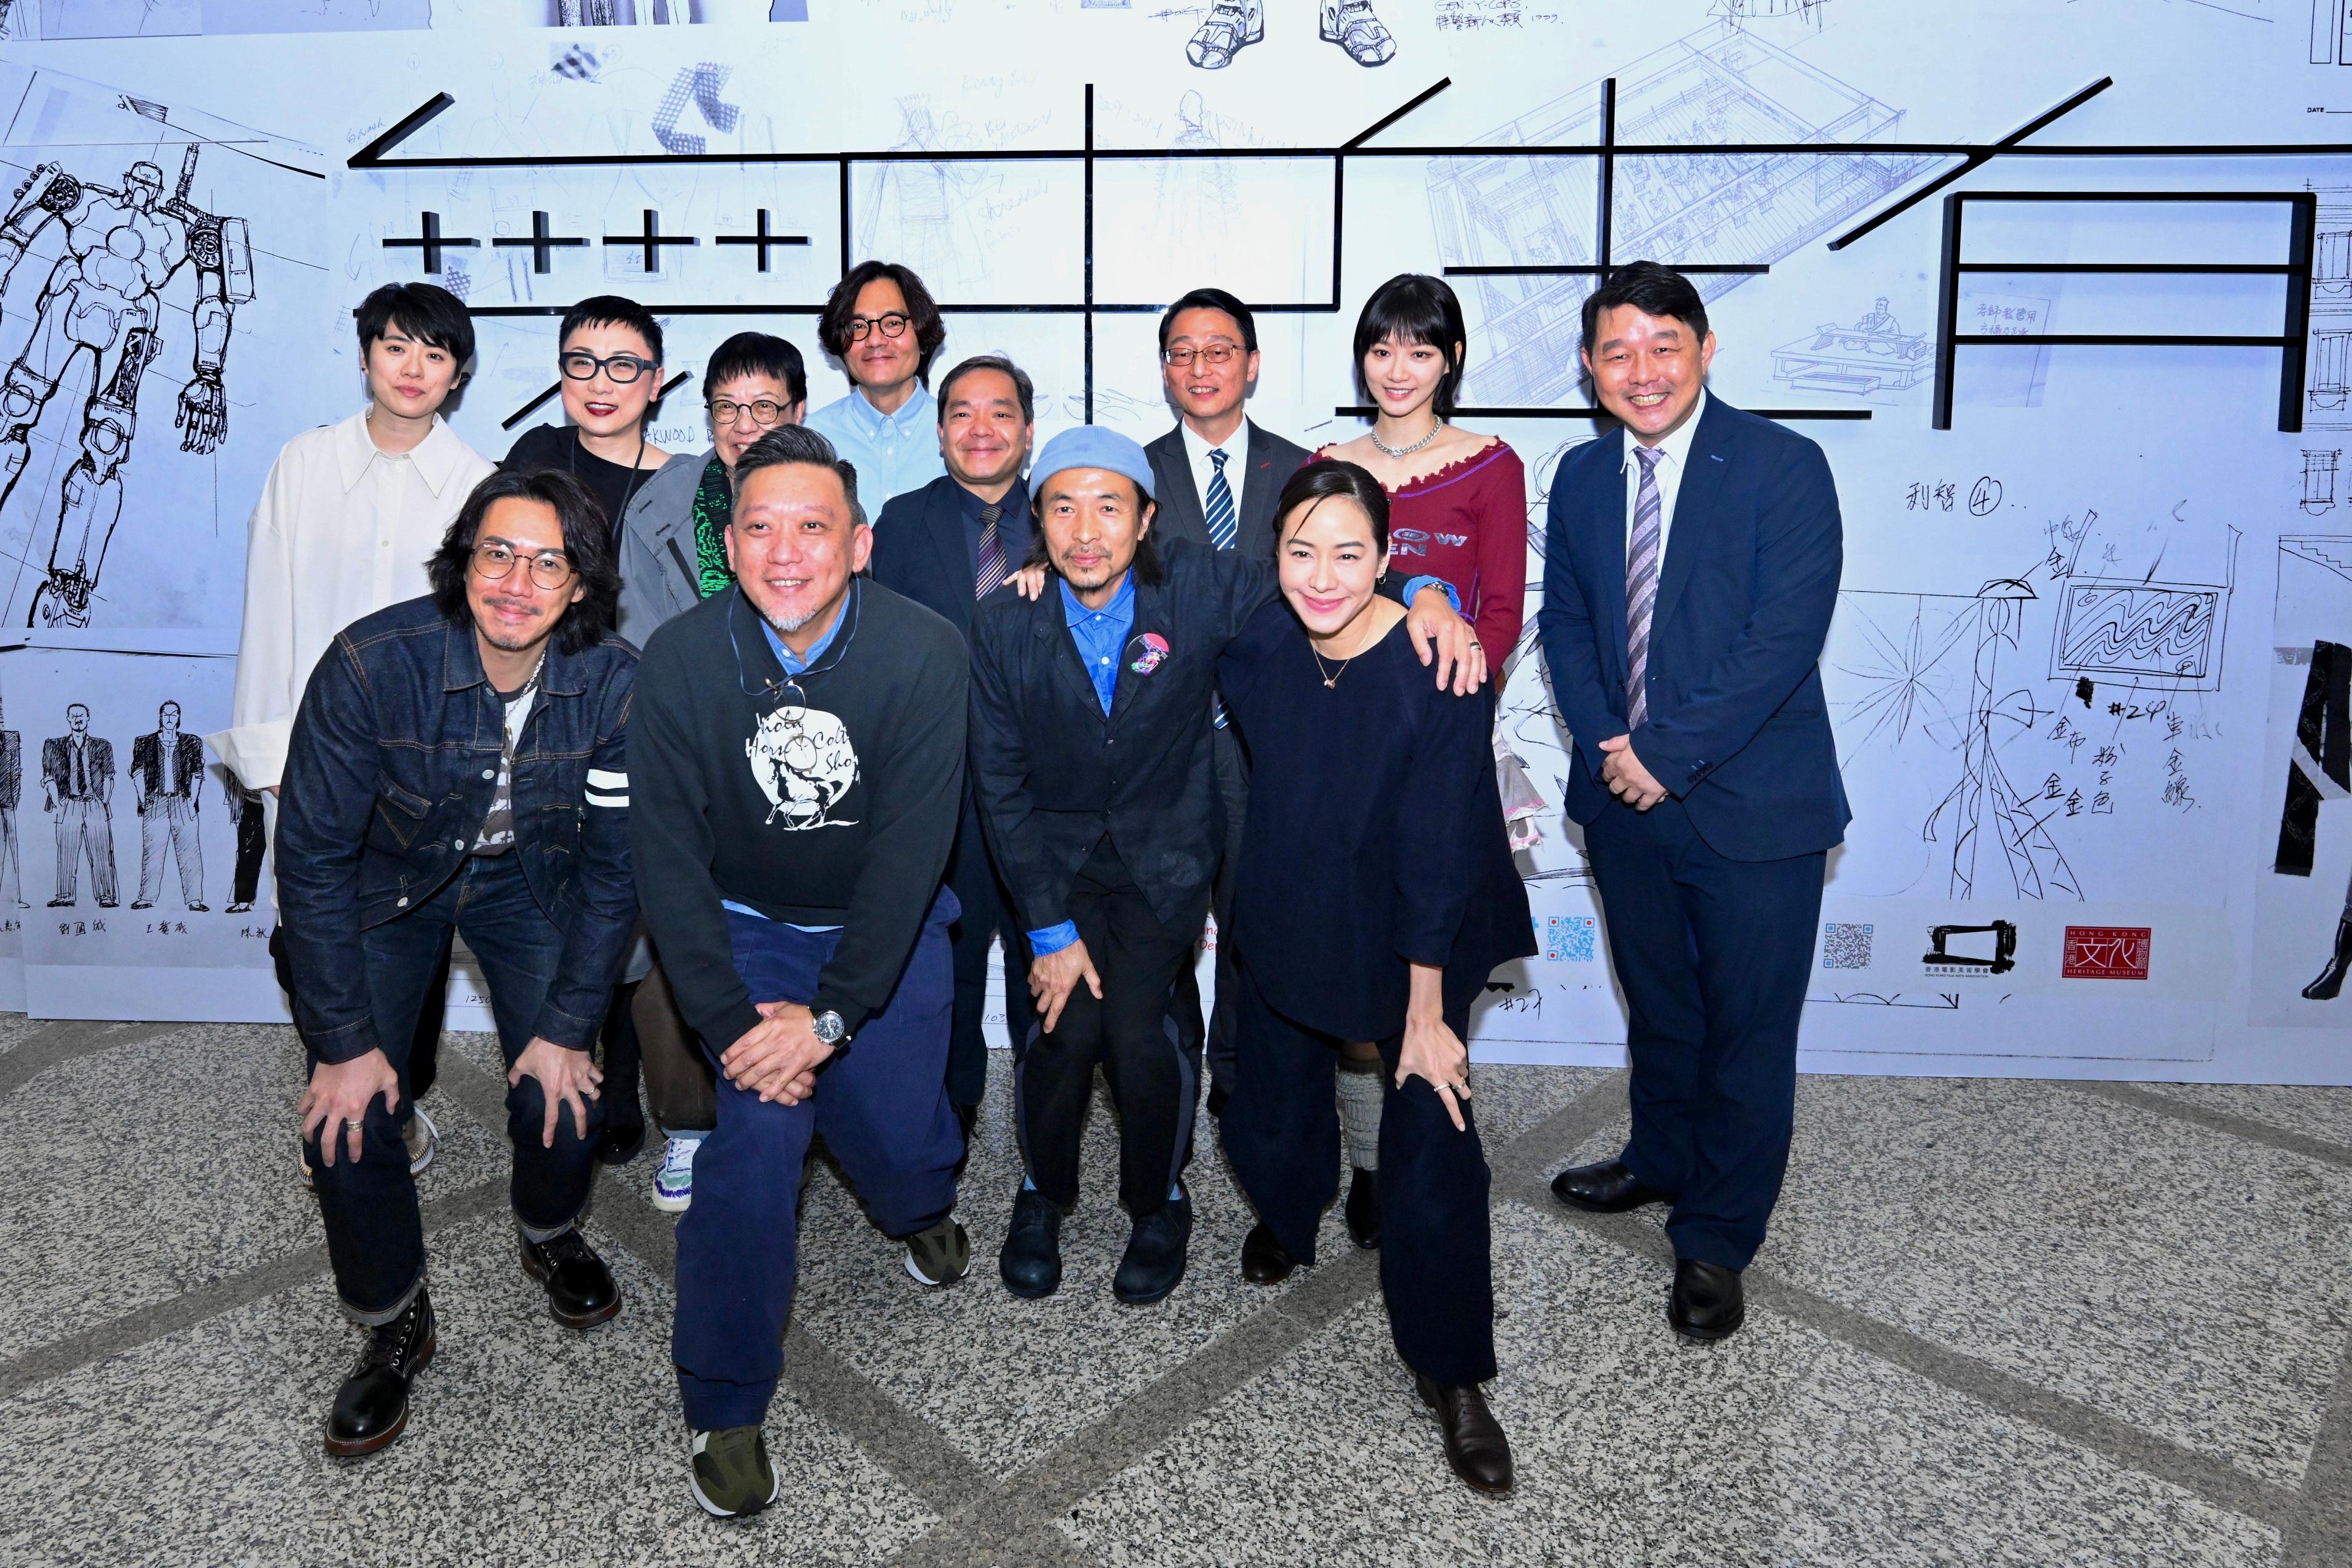 The opening ceremony for the "Out of Thin Air: Hong Kong Film Arts & Costumes Exhibition" was held today (May 2) at the Hong Kong Heritage Museum. Photo shows guests at the ceremony.
